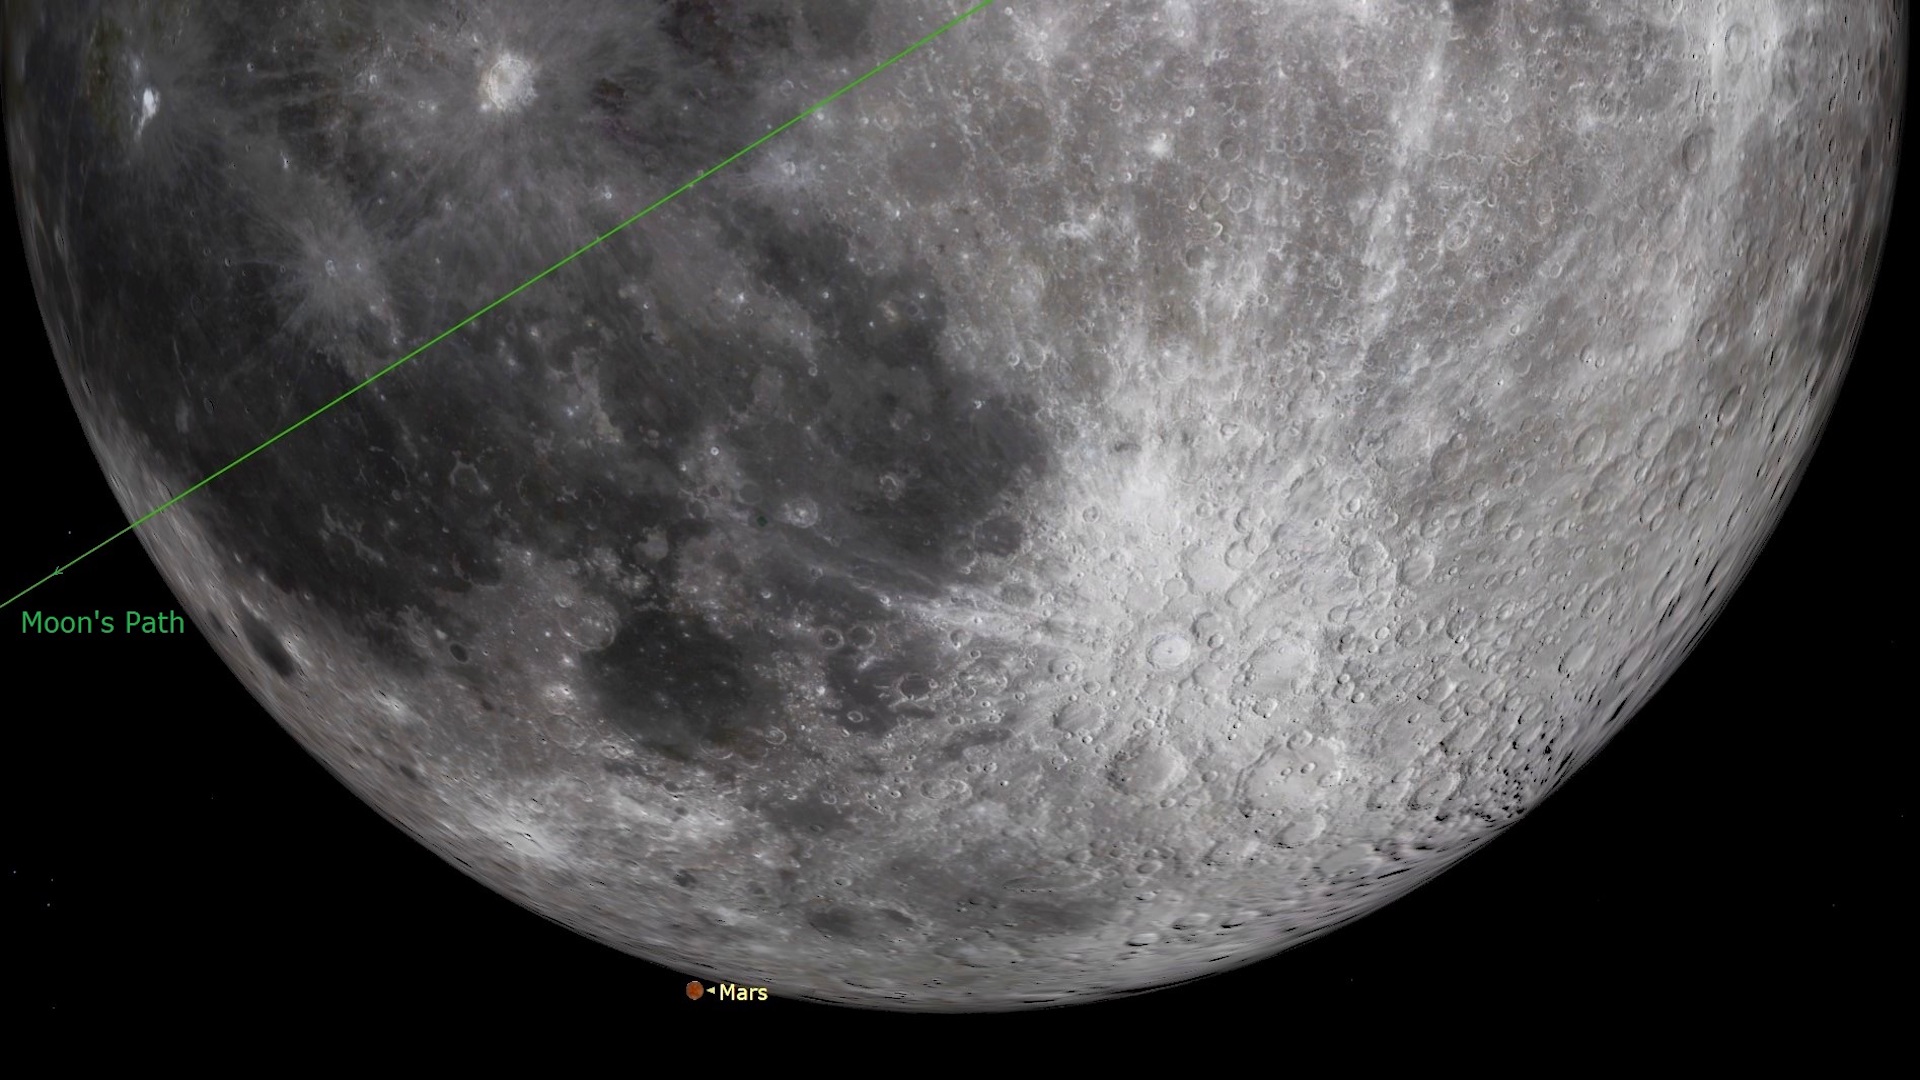 Illustration of the full Cold Moon as it will appear on December 7, with Mars visible behind it.